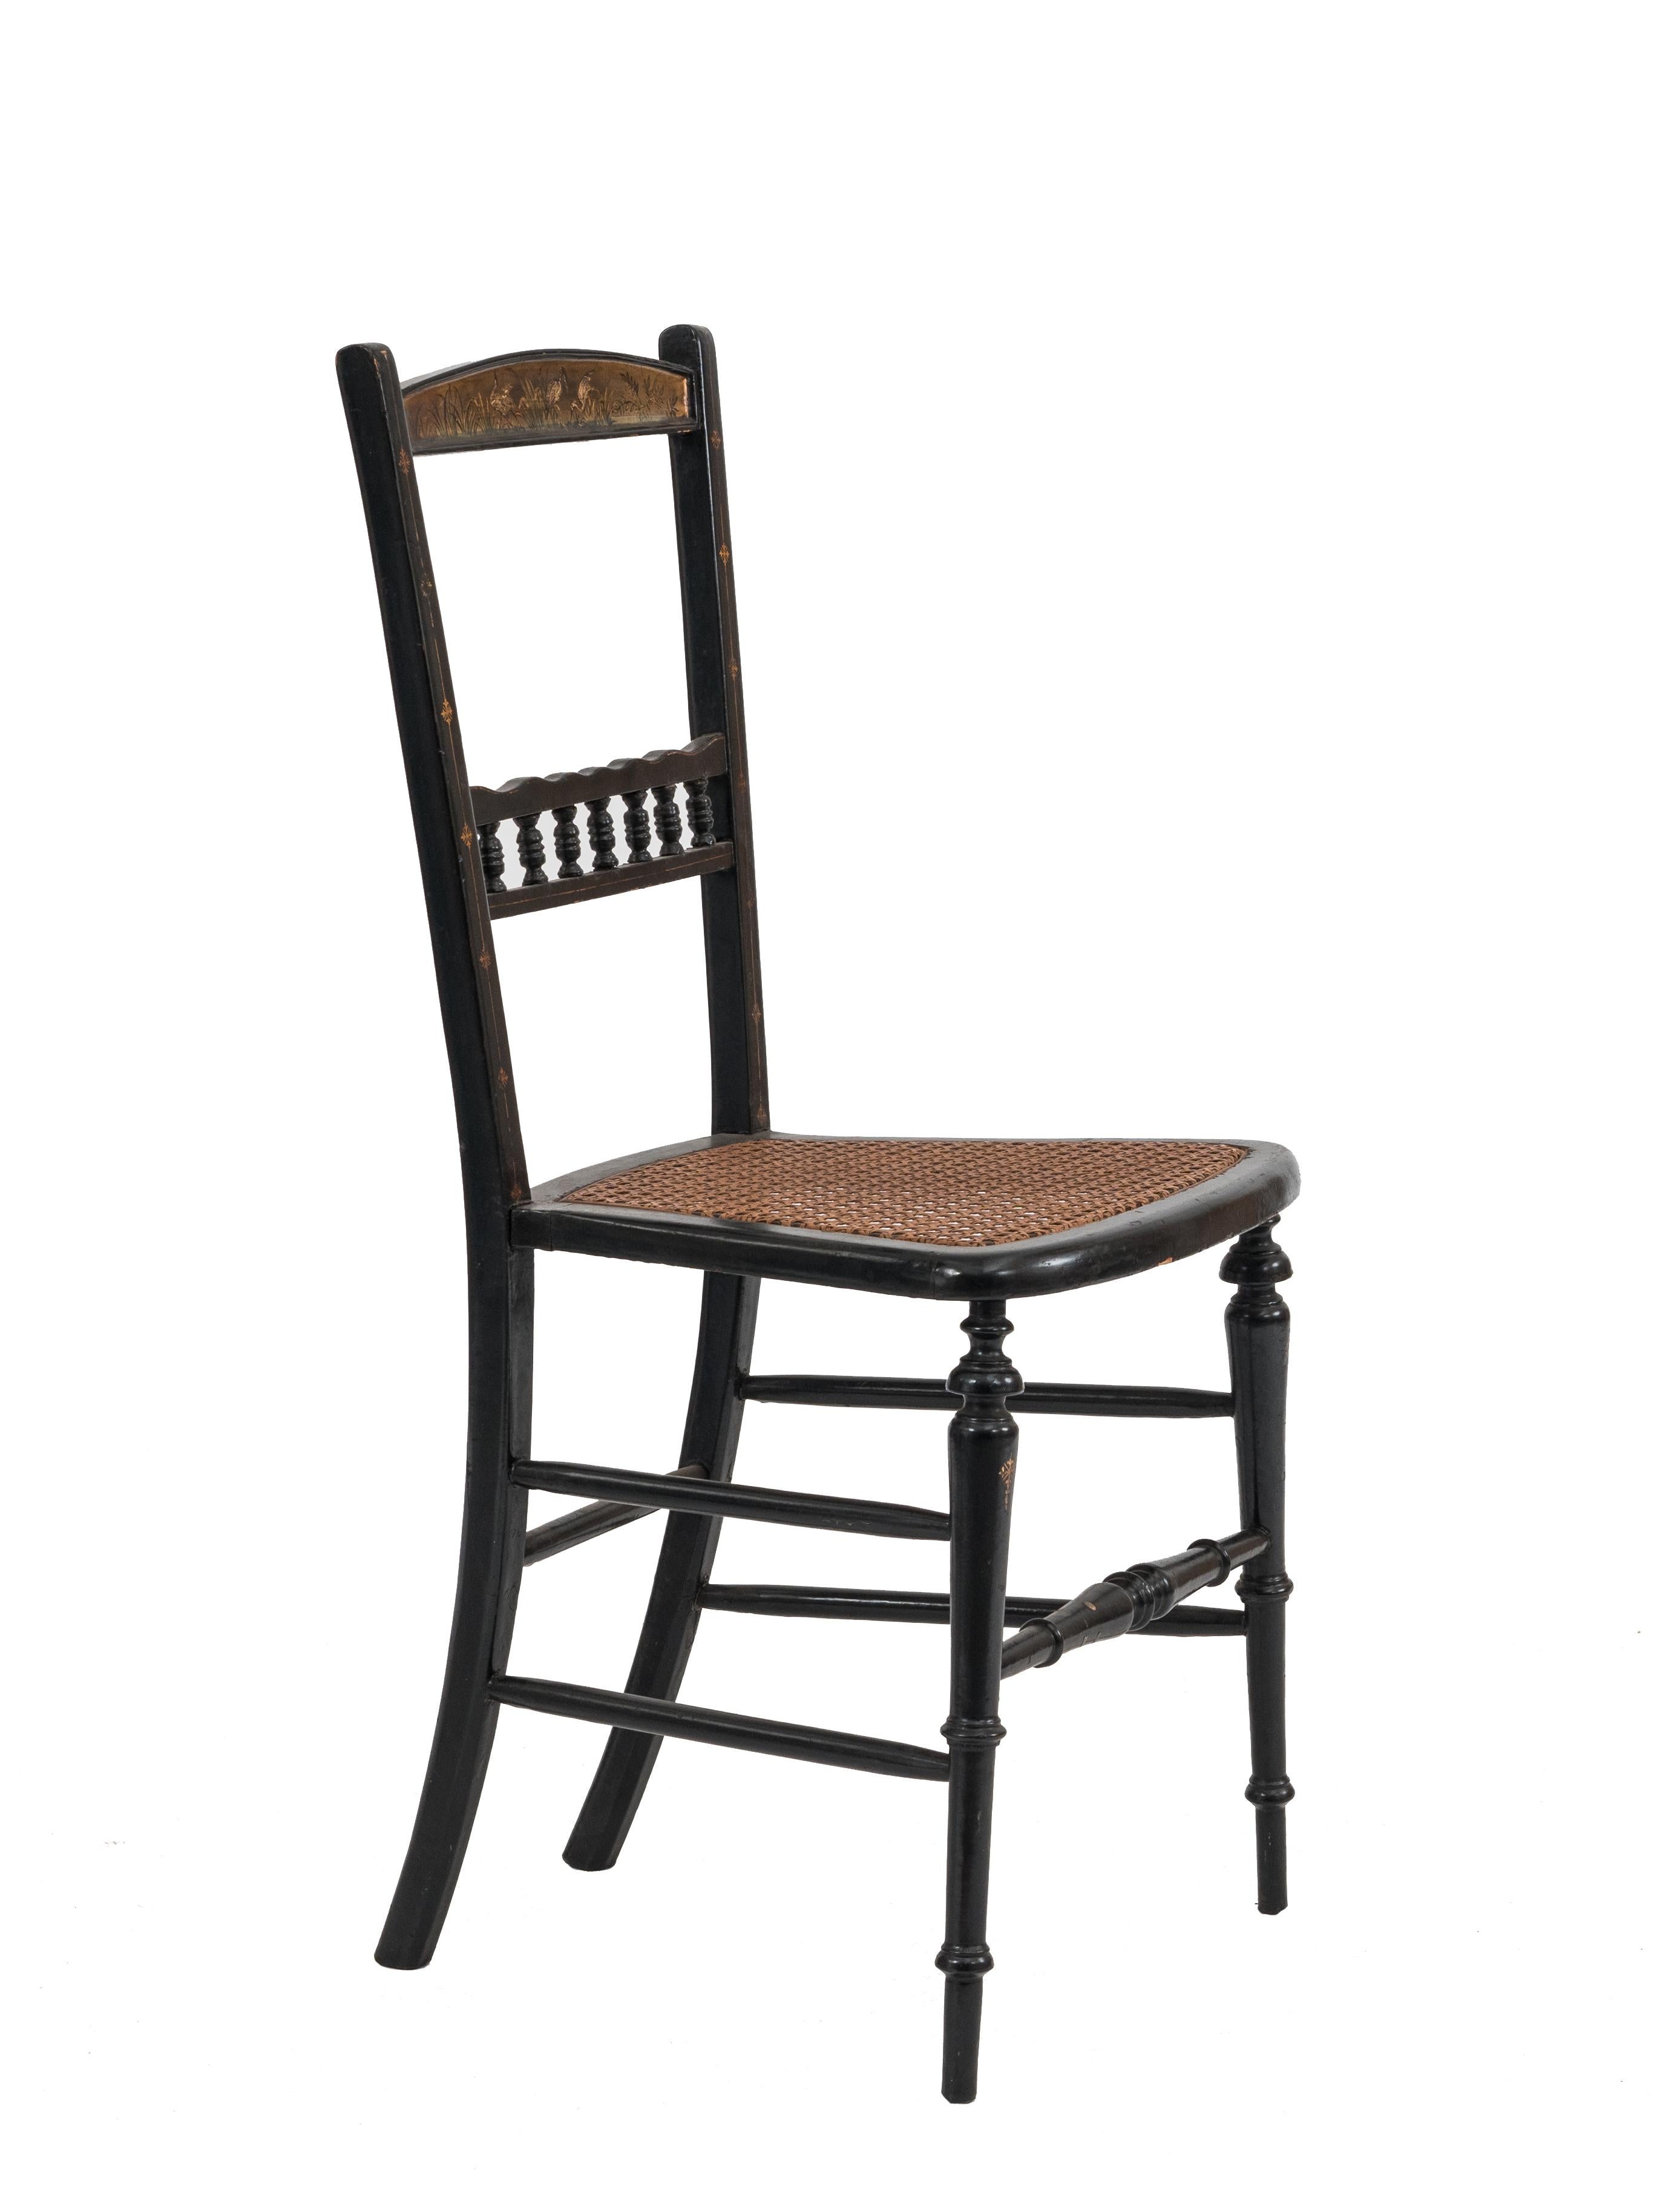 Pair of English Victorian papier-mache and pearl inlaid black lacquer side chairs with spindle design back and stretcher
